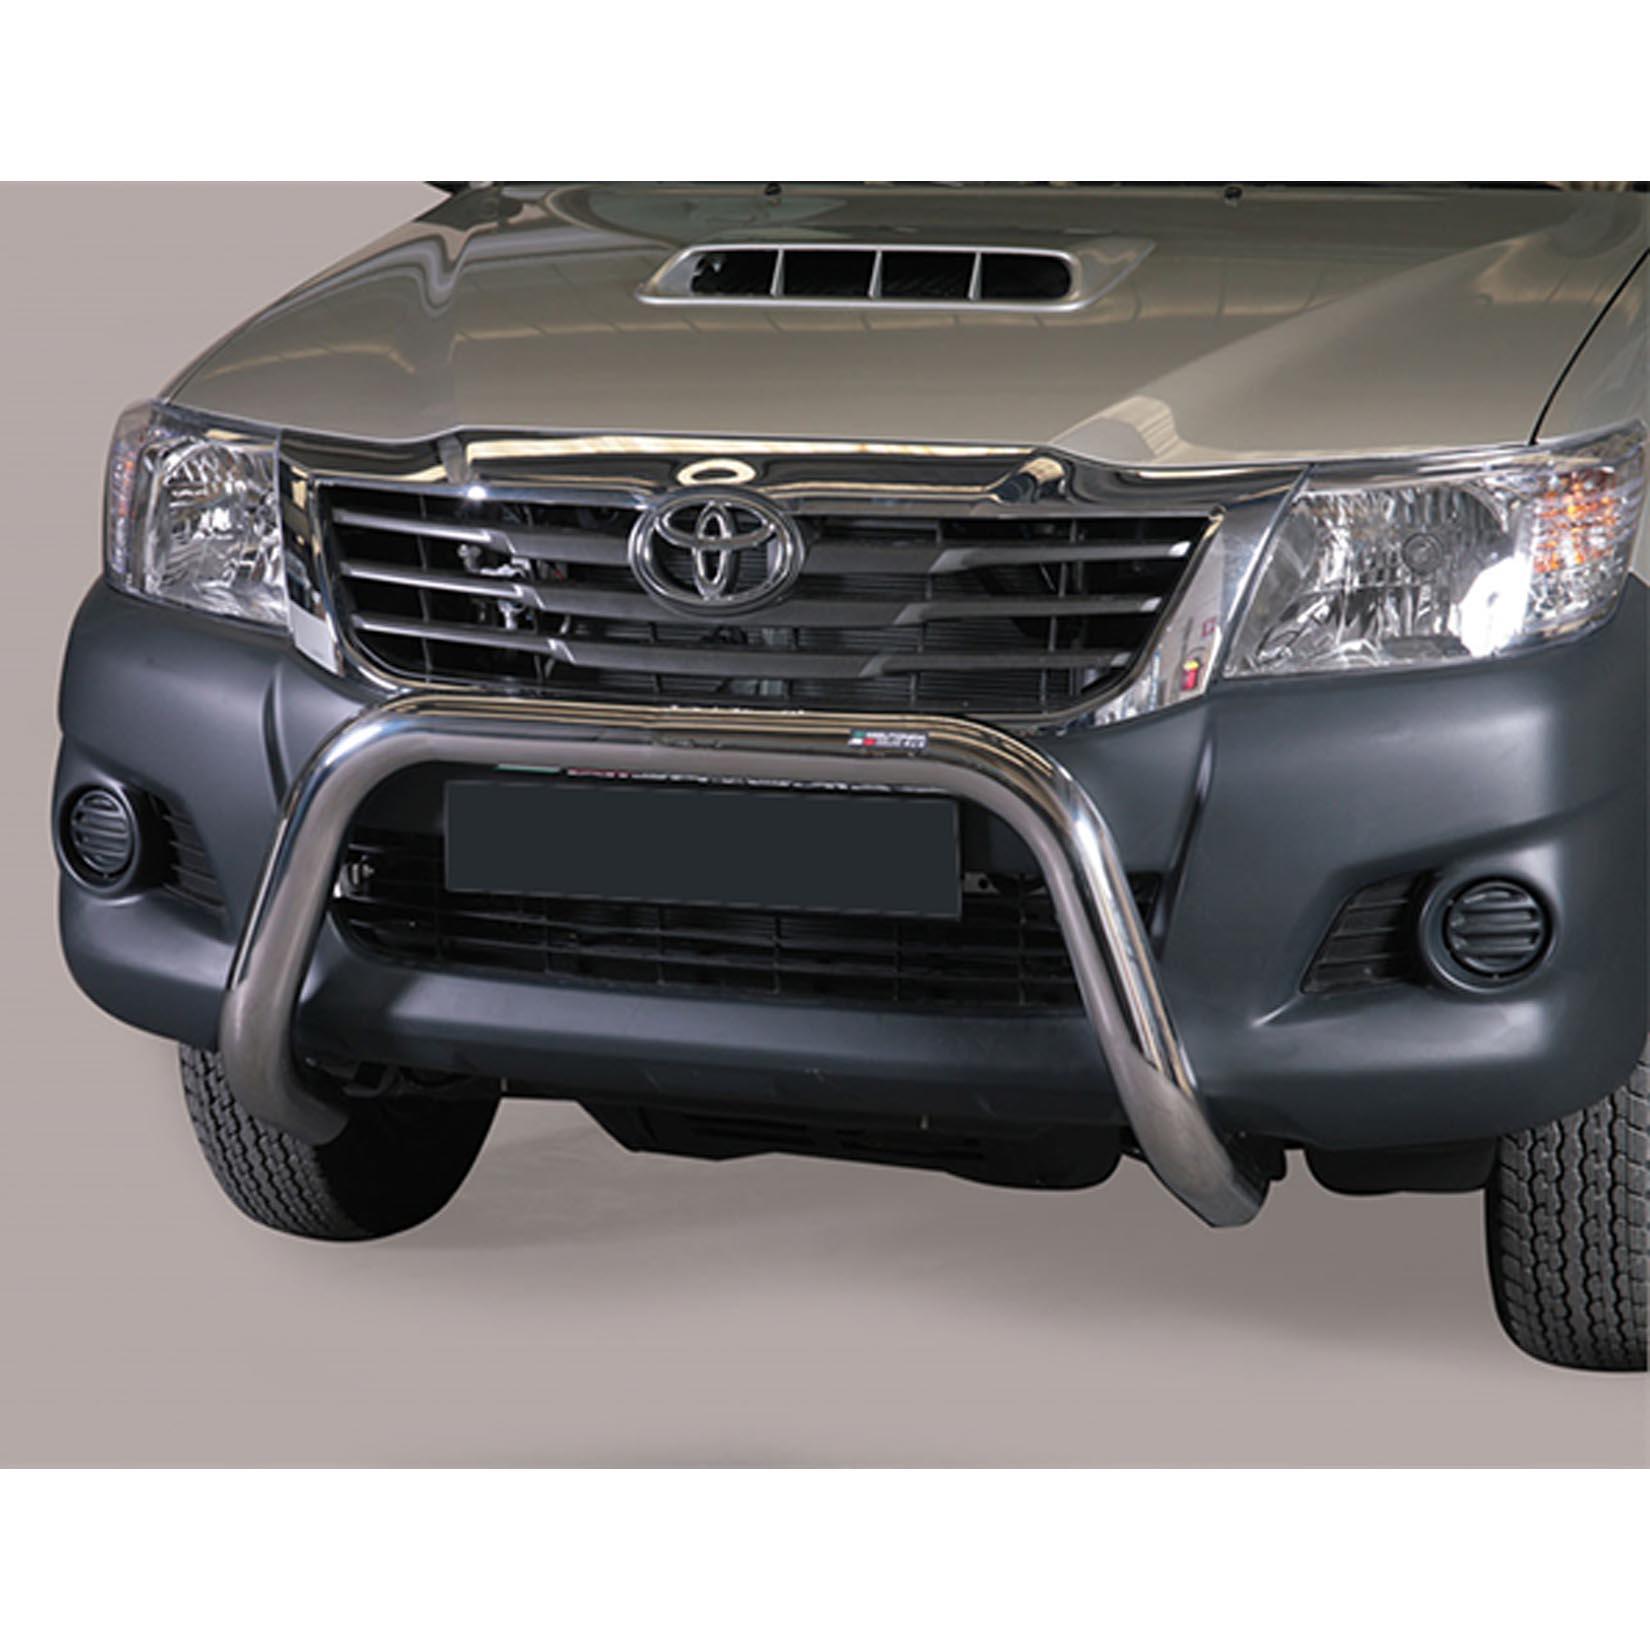 TOYOTA HILUX 2012-2015 MISUTONIDA EC APPROVED FRONT BAR - 76MM - STAINLESS FINISH - Storm Xccessories2